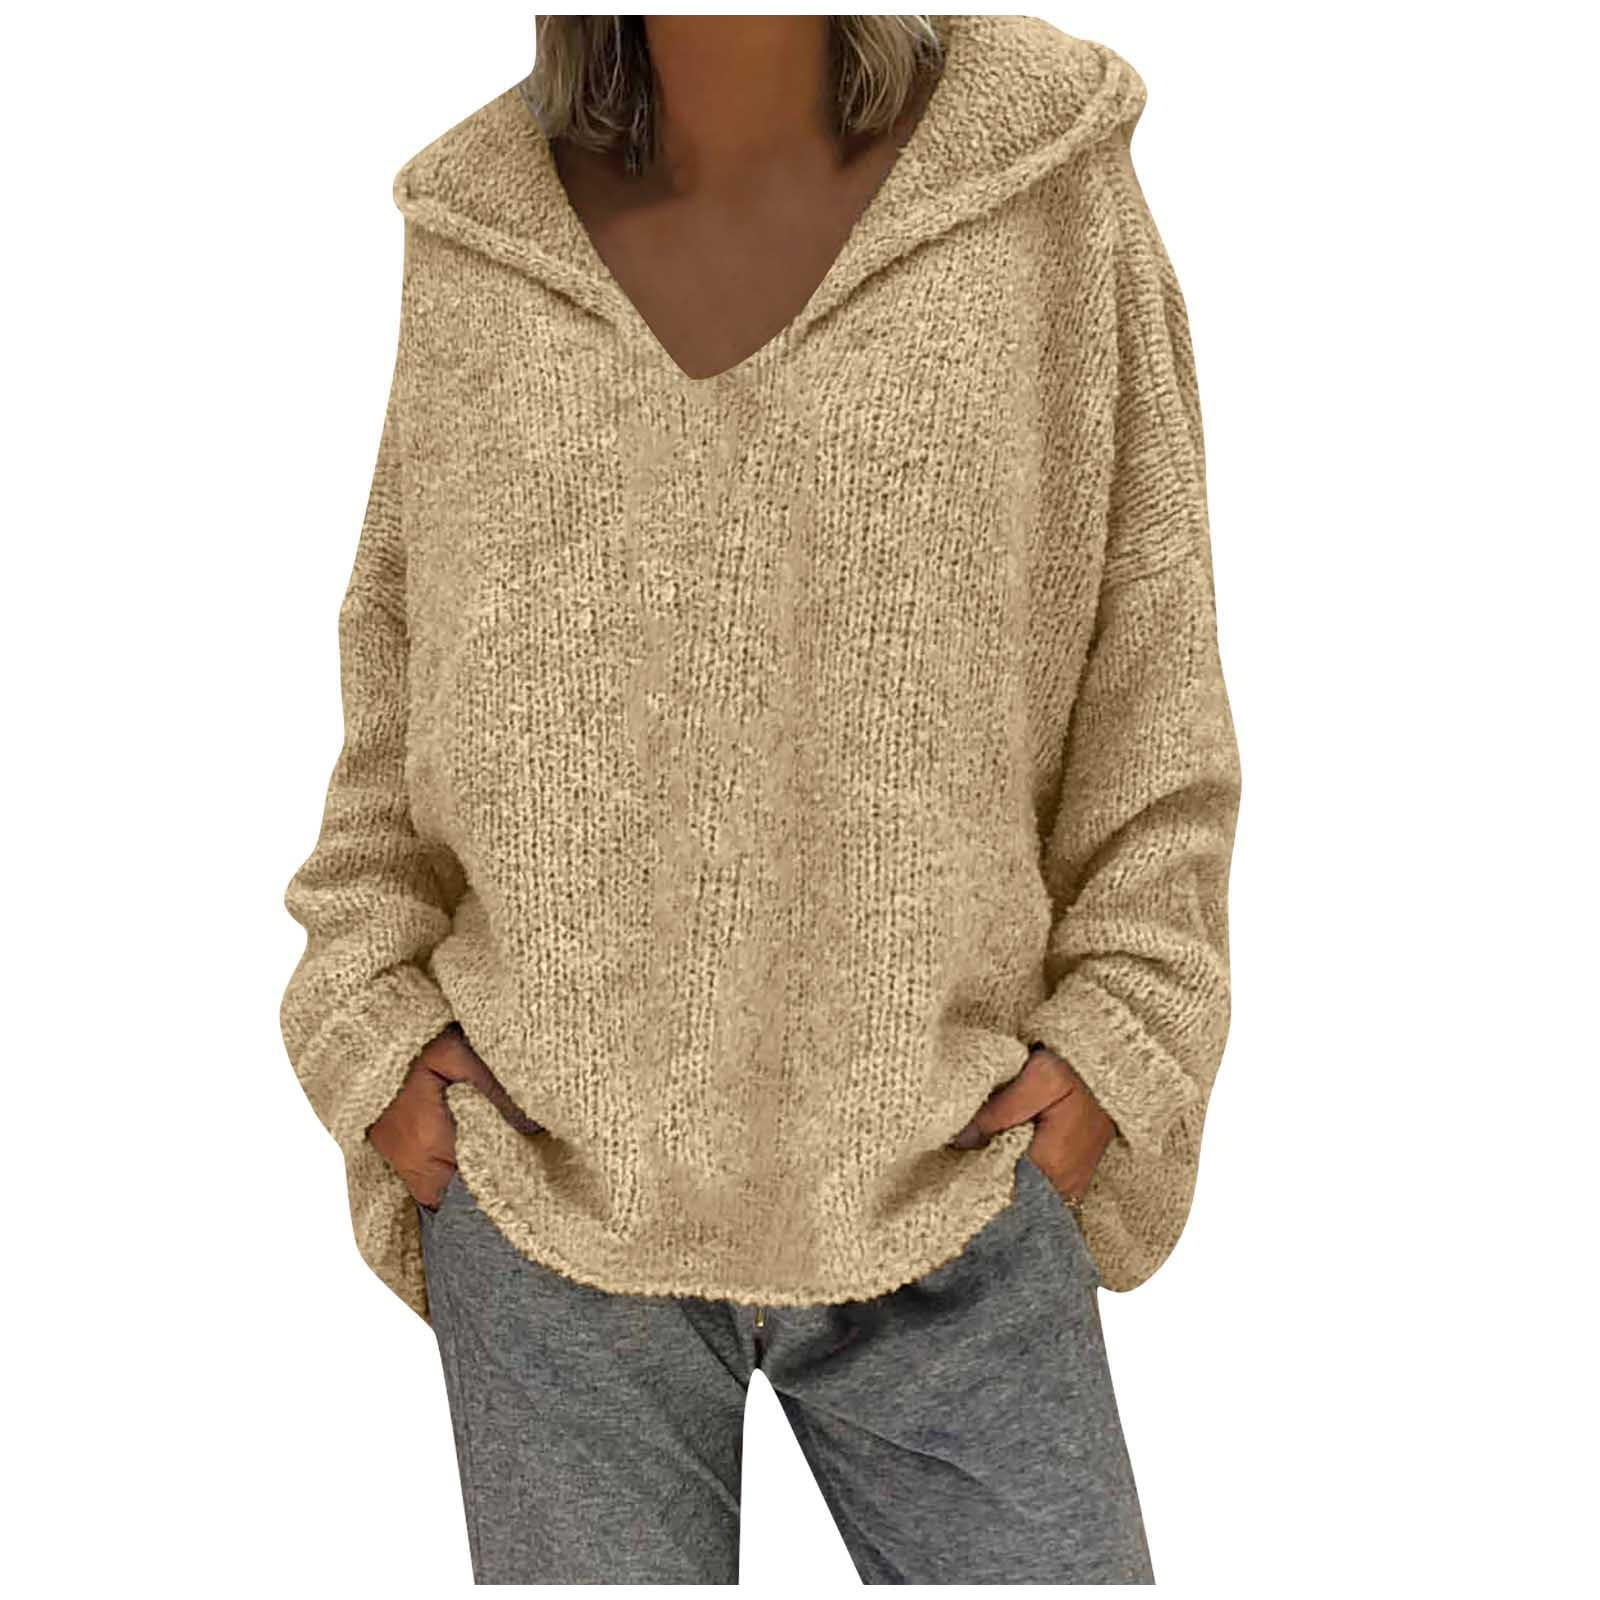 Tops Fashion Size Women Hood Long Sweater Sleeves Color Solid